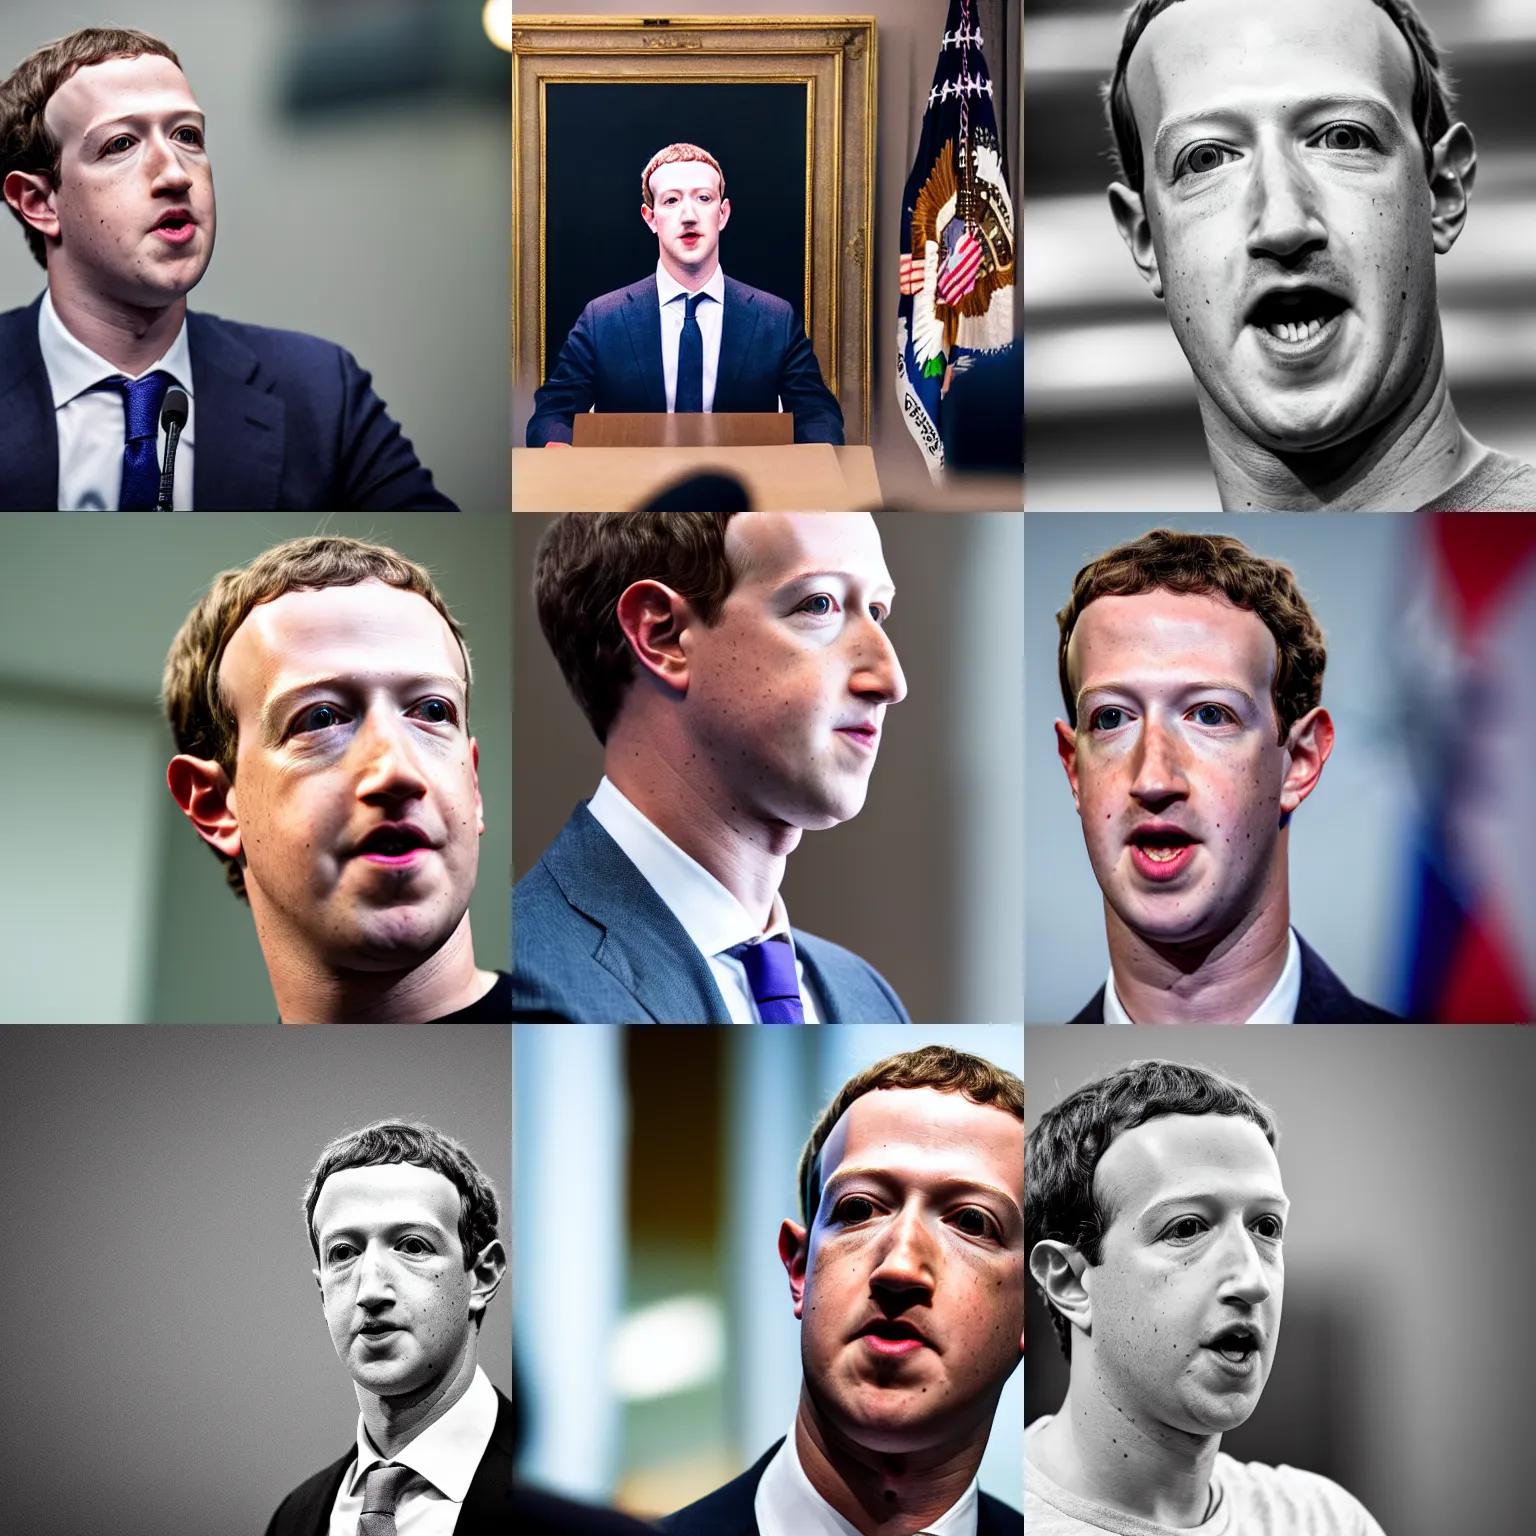 Prompt: headshot of Mark Zuckerberg as the president of the united states arguing with reporters, EOS-1D, f/1.4, ISO 200, 1/160s, 8K, RAW, unedited, symmetrical balance, in-frame, Photoshop, Nvidia, Topaz AI